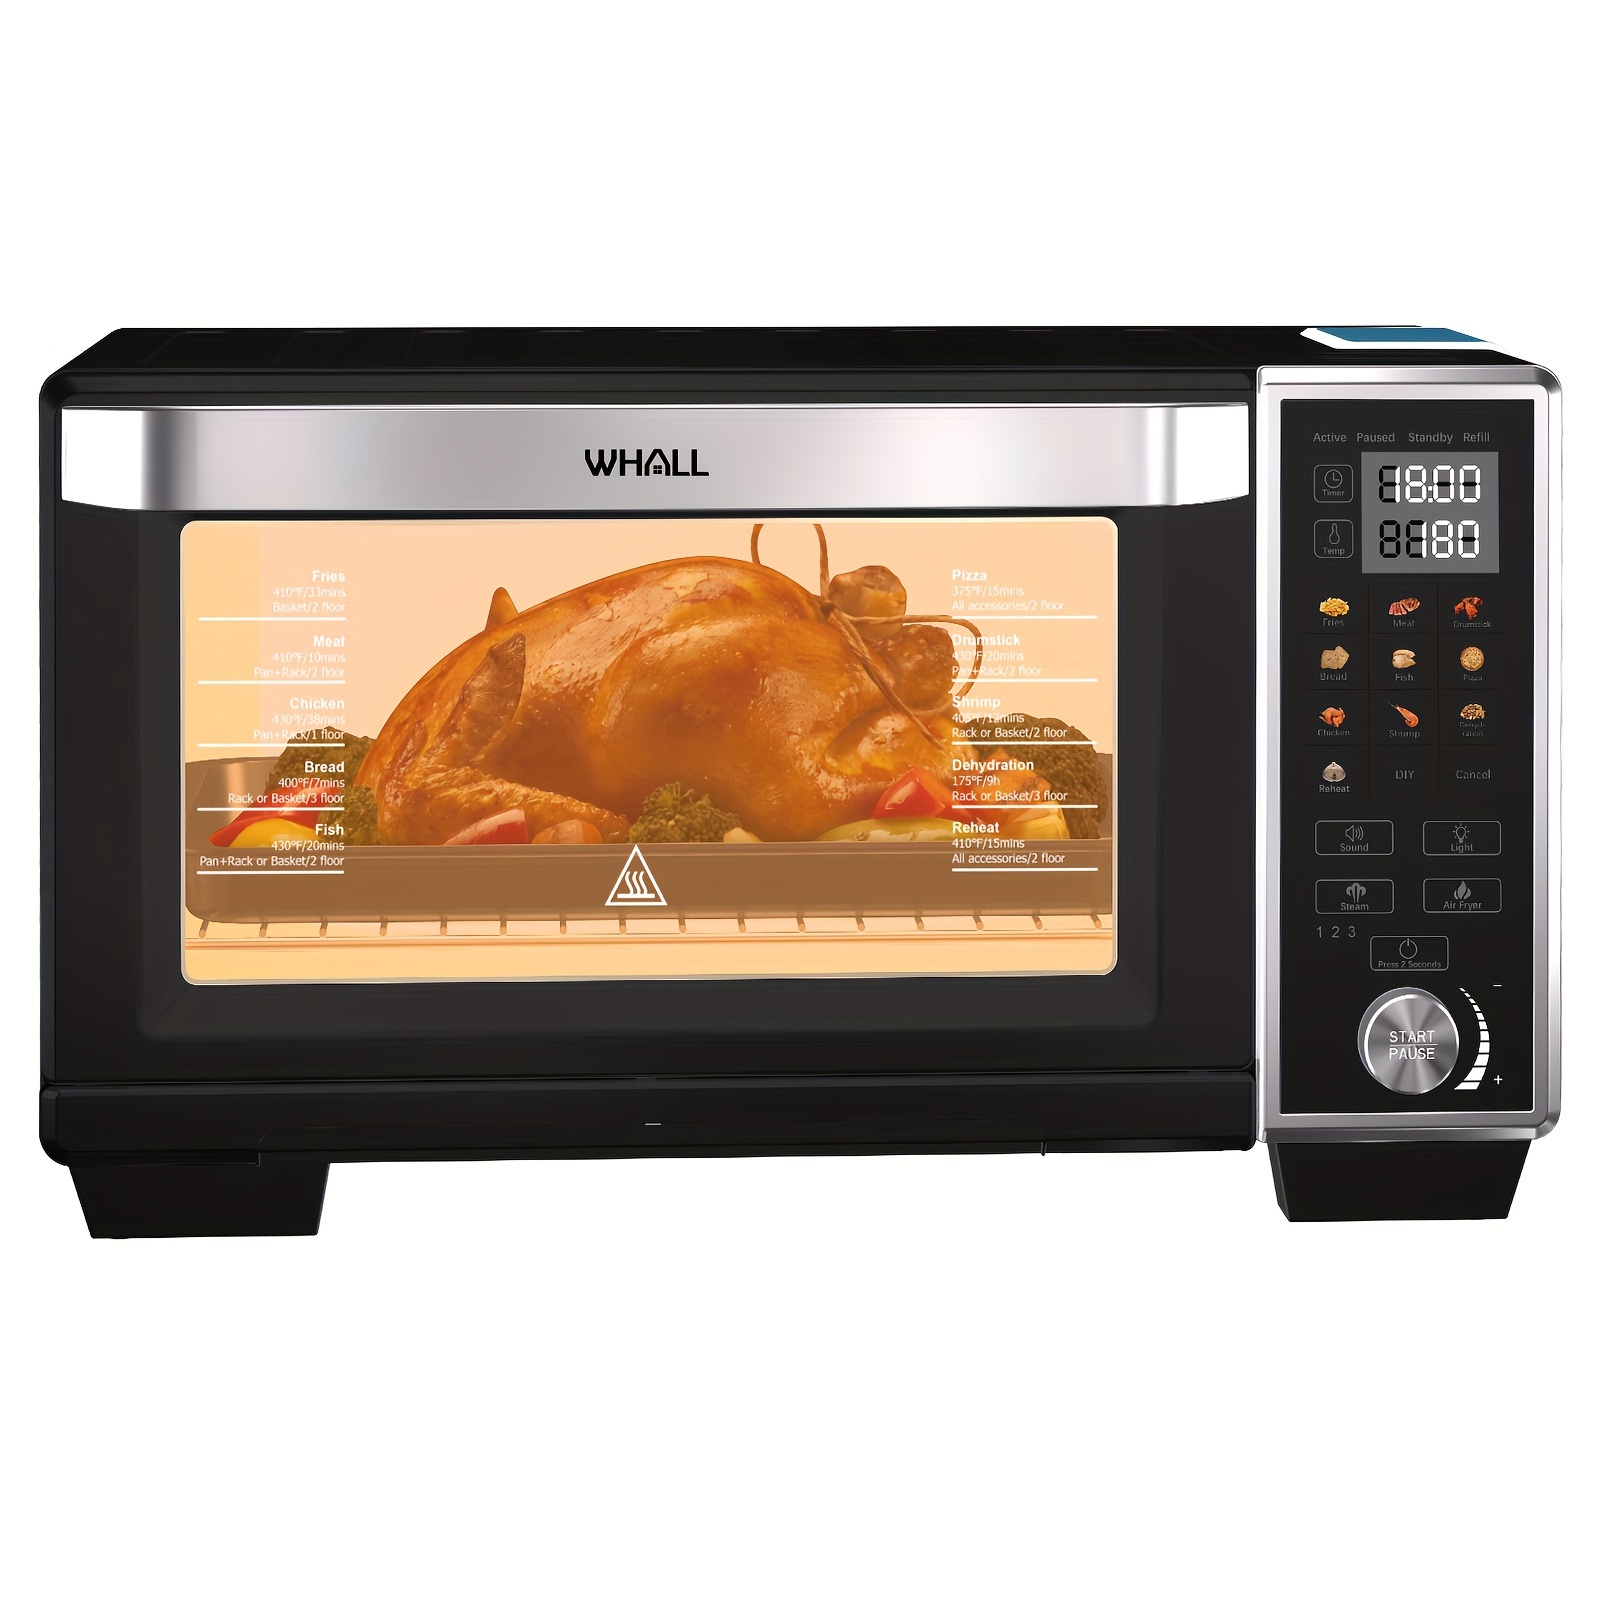 

Whall 28l Toaster Oven Air Fryer, Max Xl Large Smart Oven, 11 Function Toaster Oven Countertop With Steam Function, 12-inch Pizza, 1700w